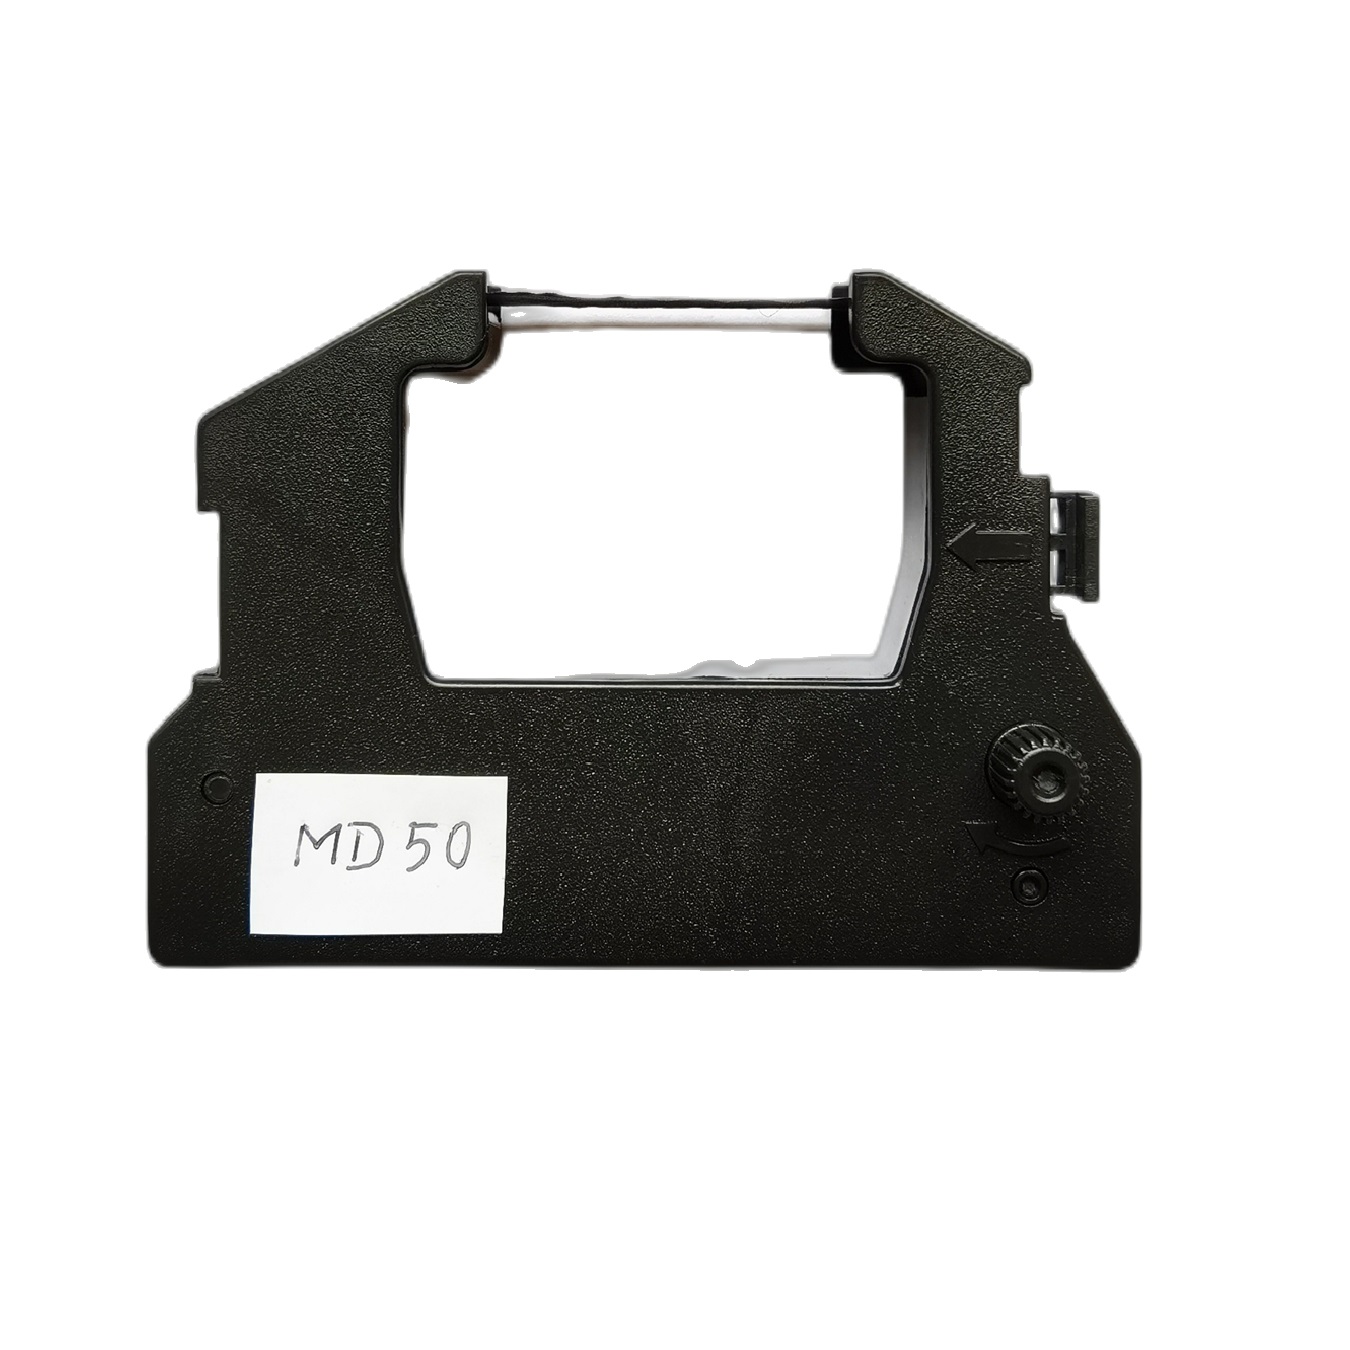 MD50 Ink Ribbon For The Internal Printer Of MDcare Sealers MD880/MD860 Series